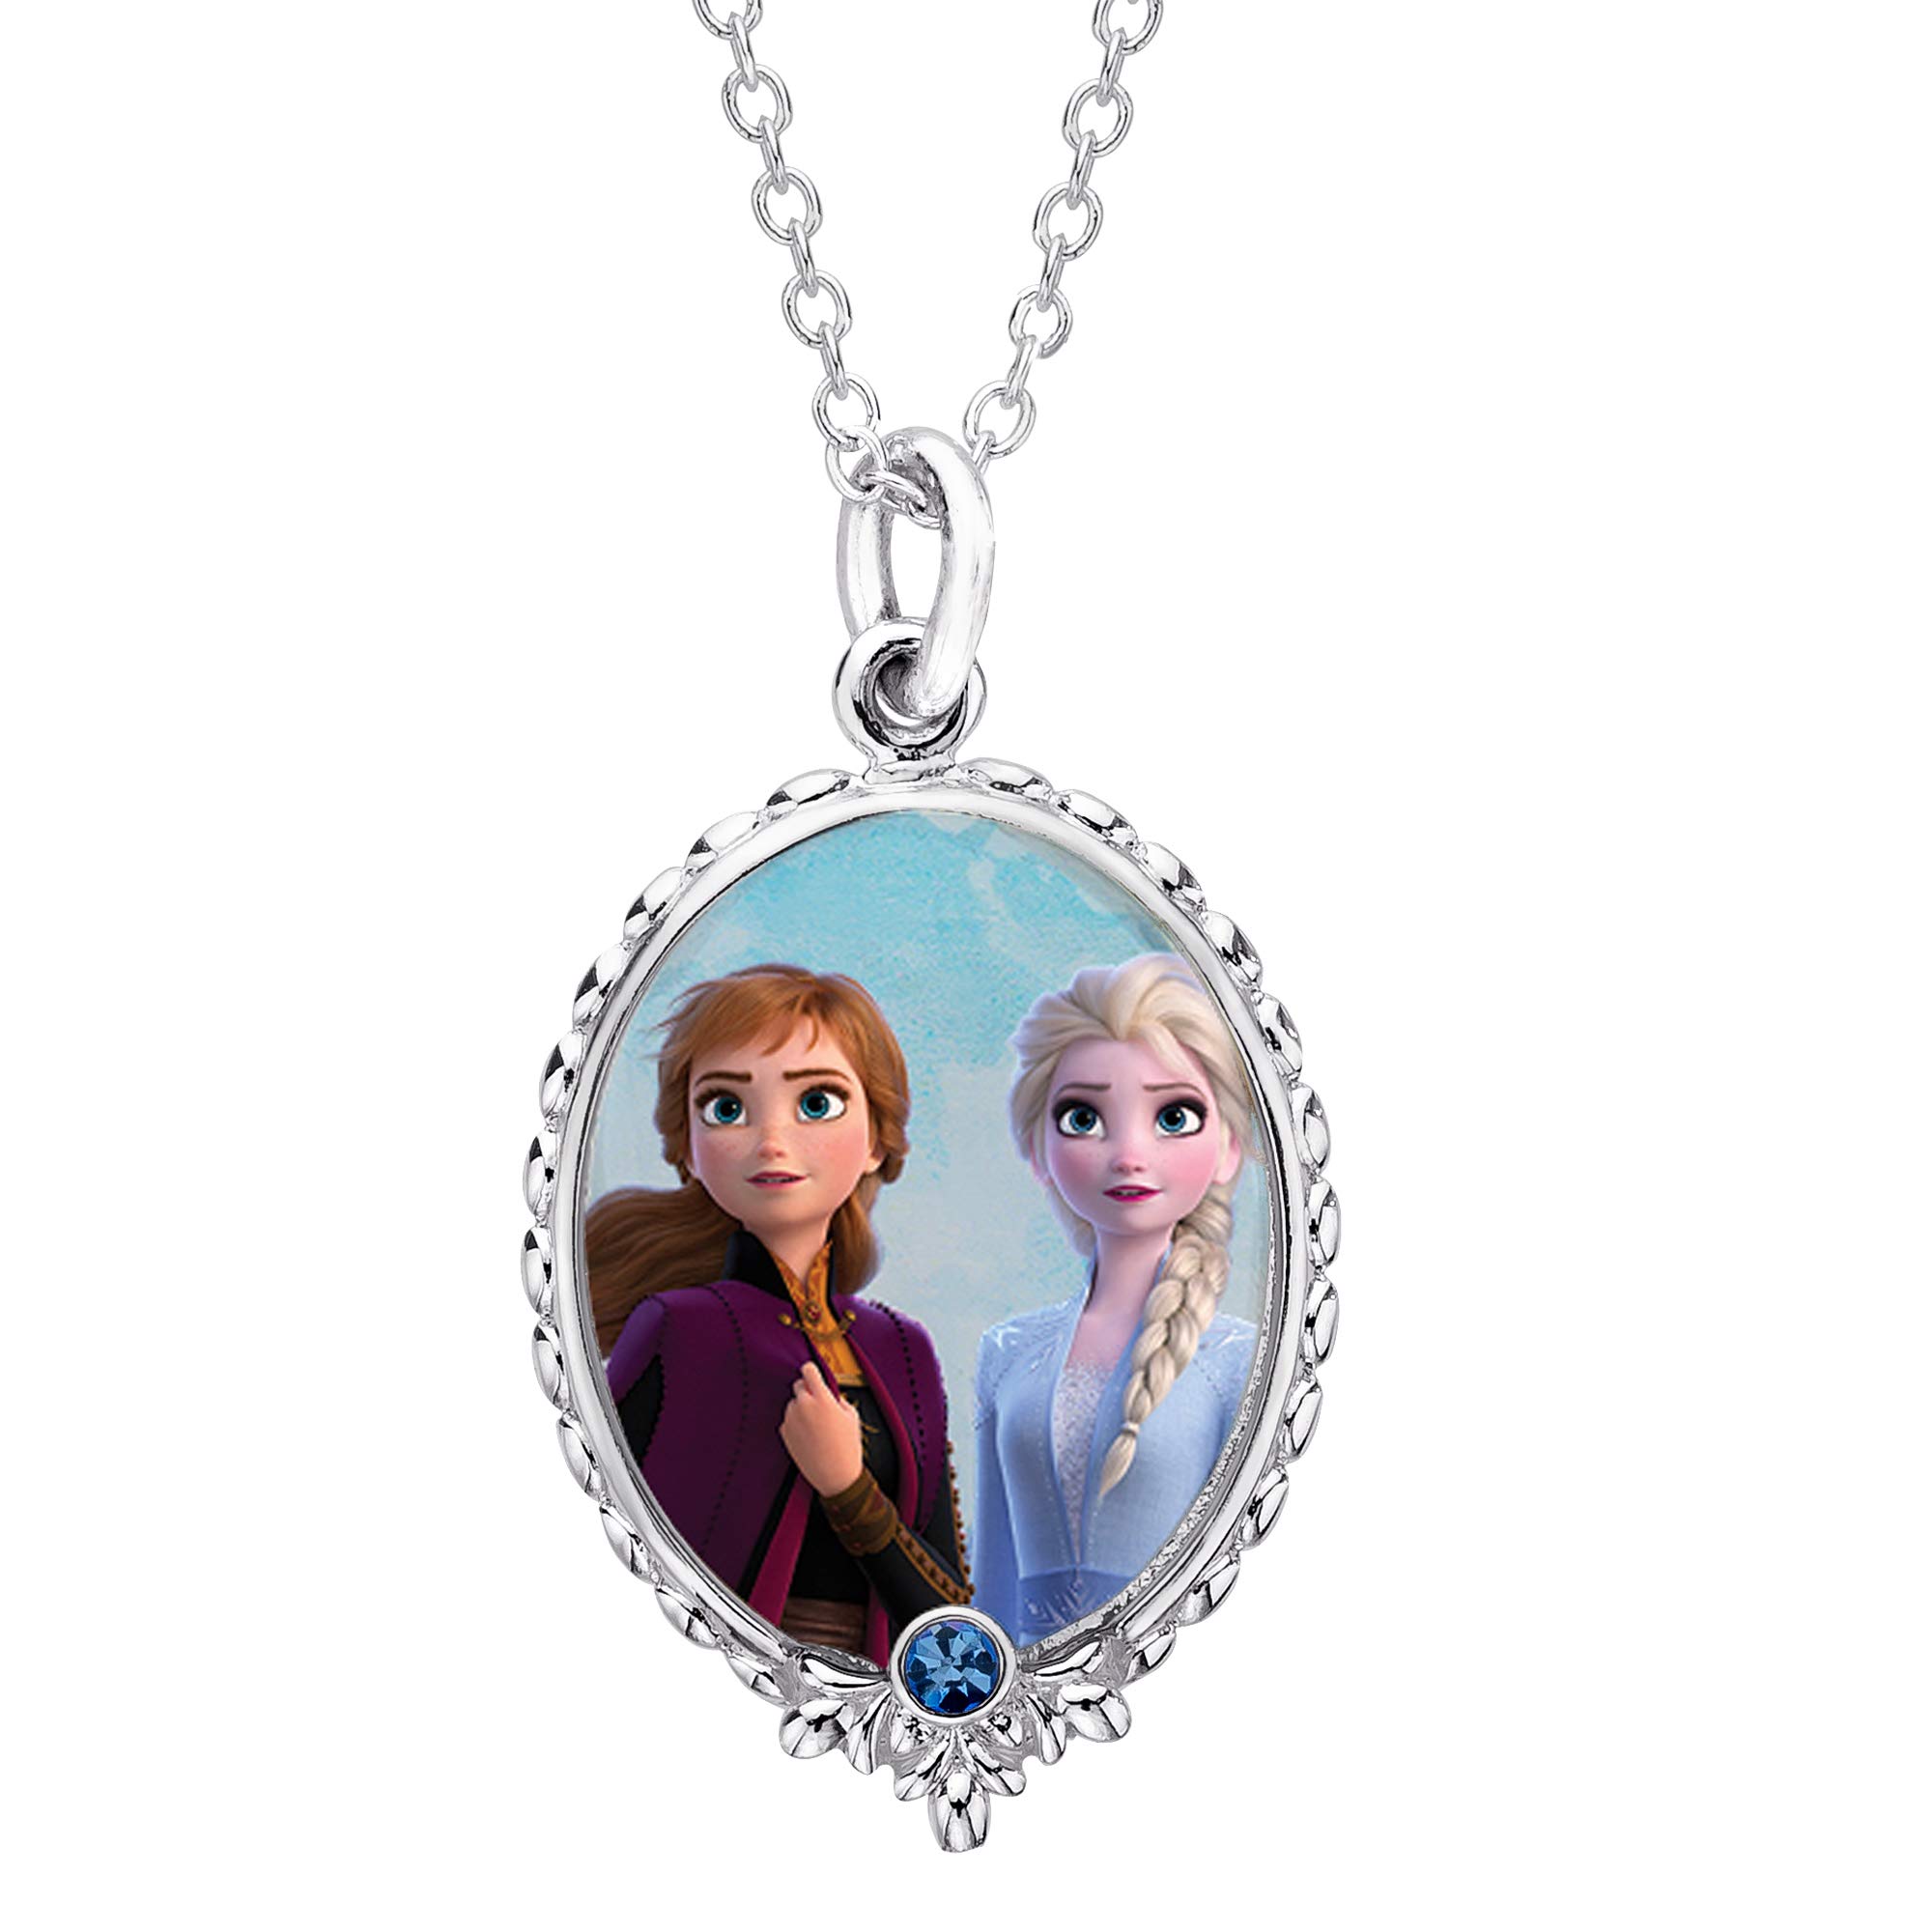 Disney Womens Frozen II Necklace - Silver Plated Frozen Necklace with Snowflake or Elsa and Anna Pendant Jewelry - Frozen Jewelry